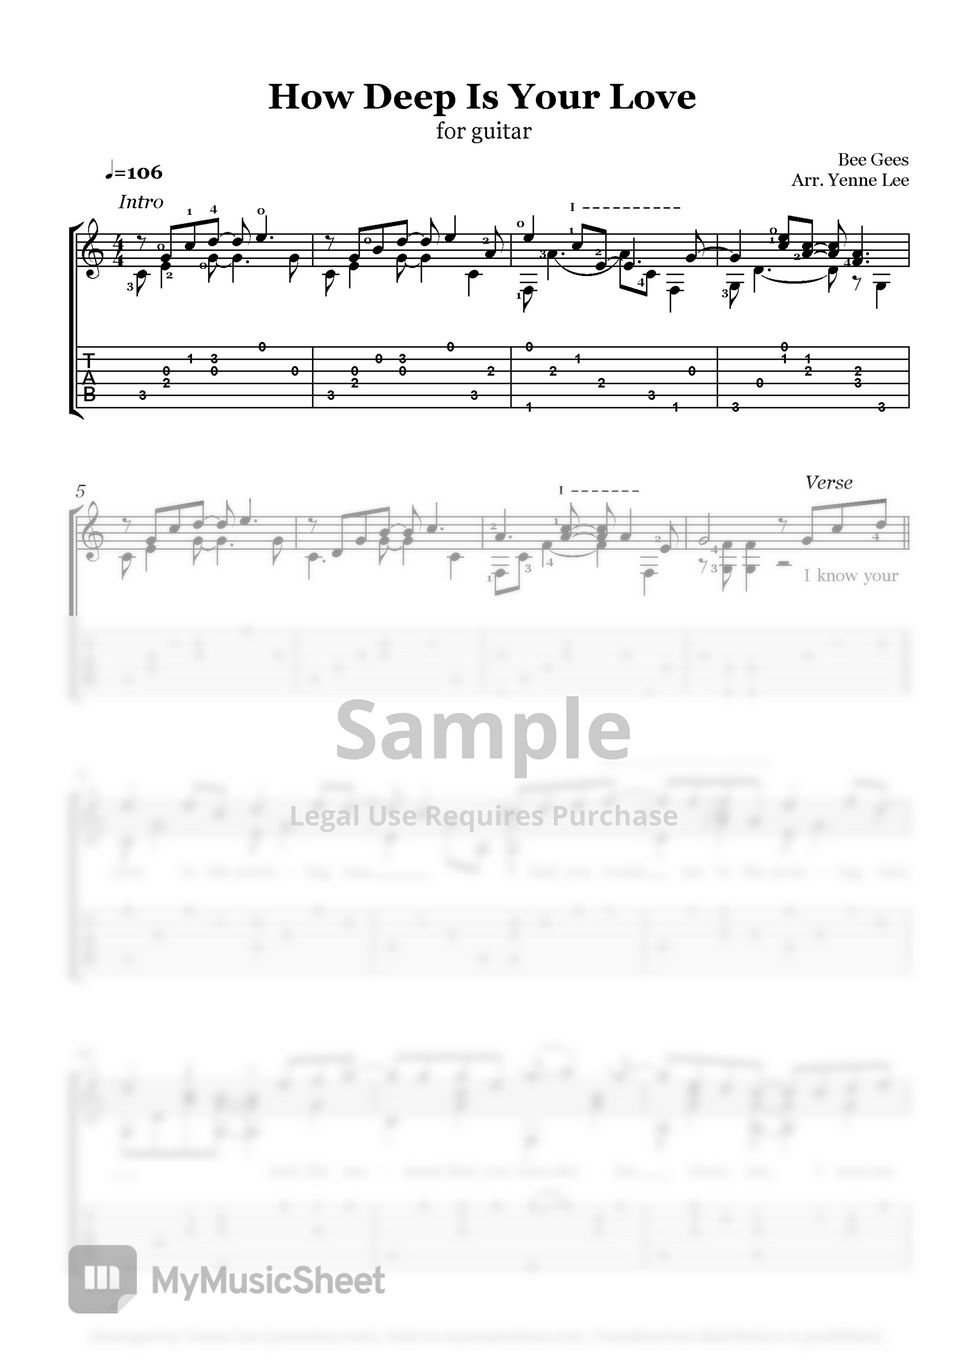 How Deep Is Your Love Sheet Music, Take That